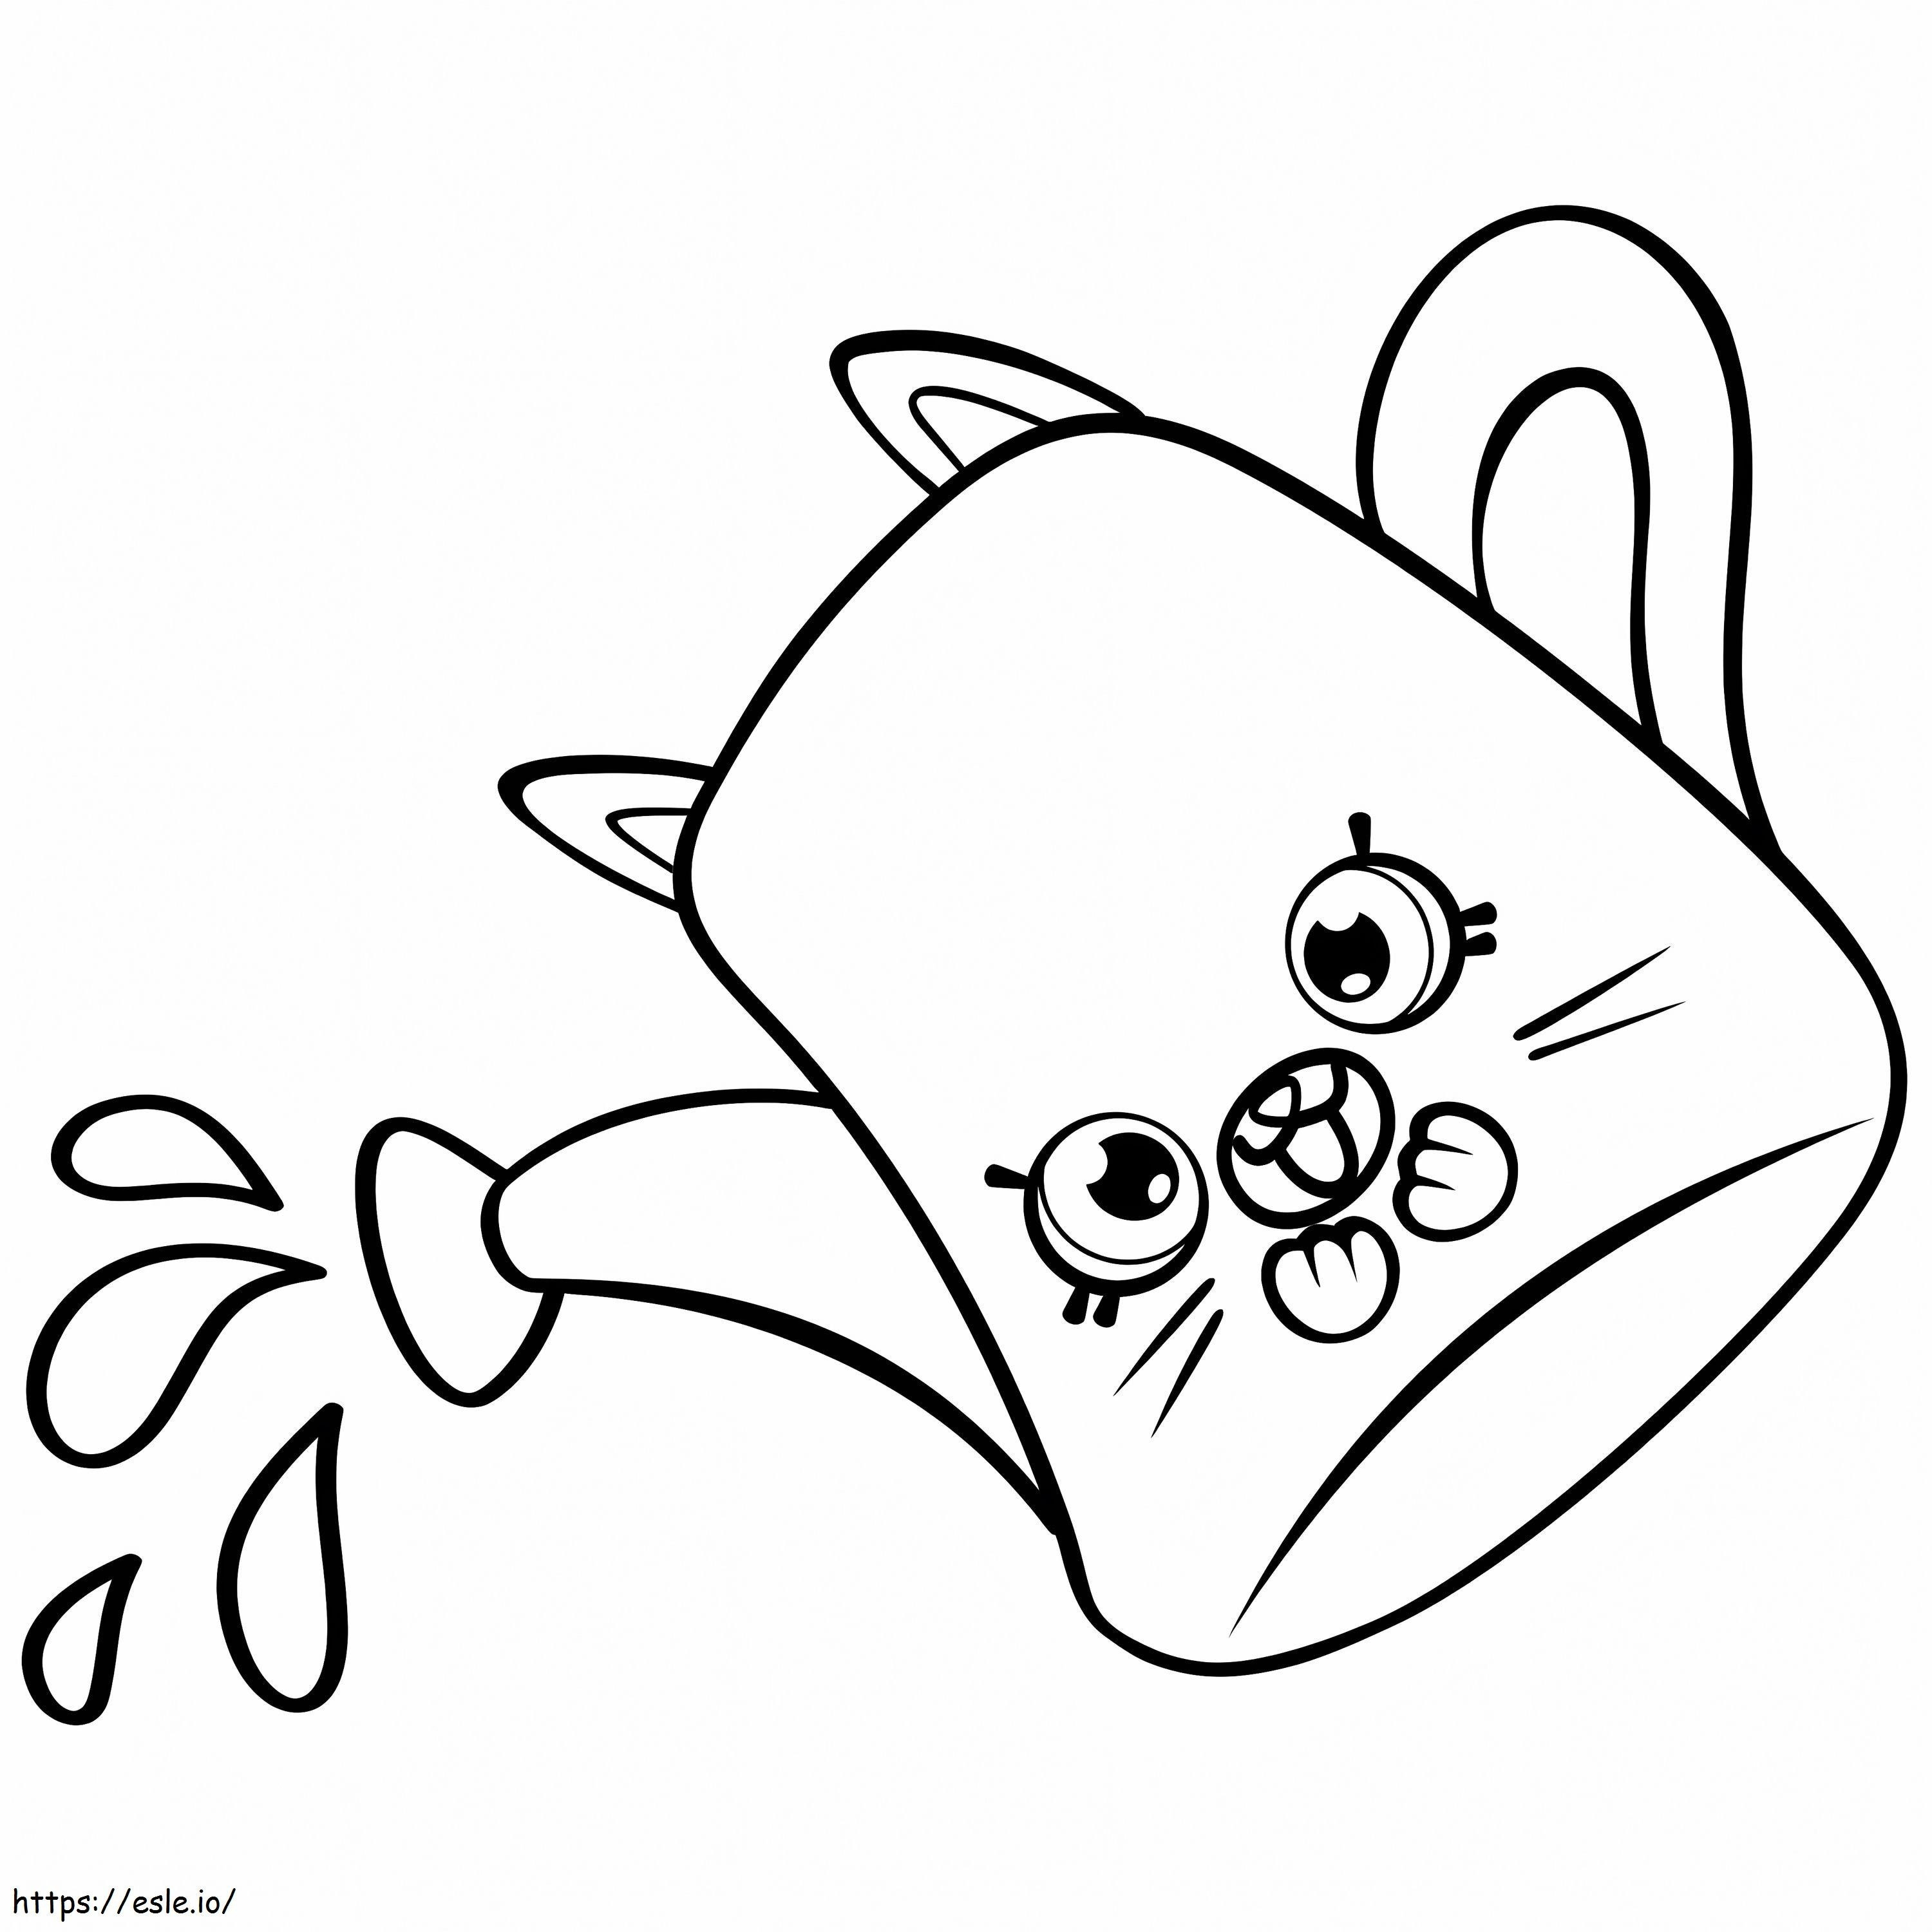 Drips Shopkin coloring page